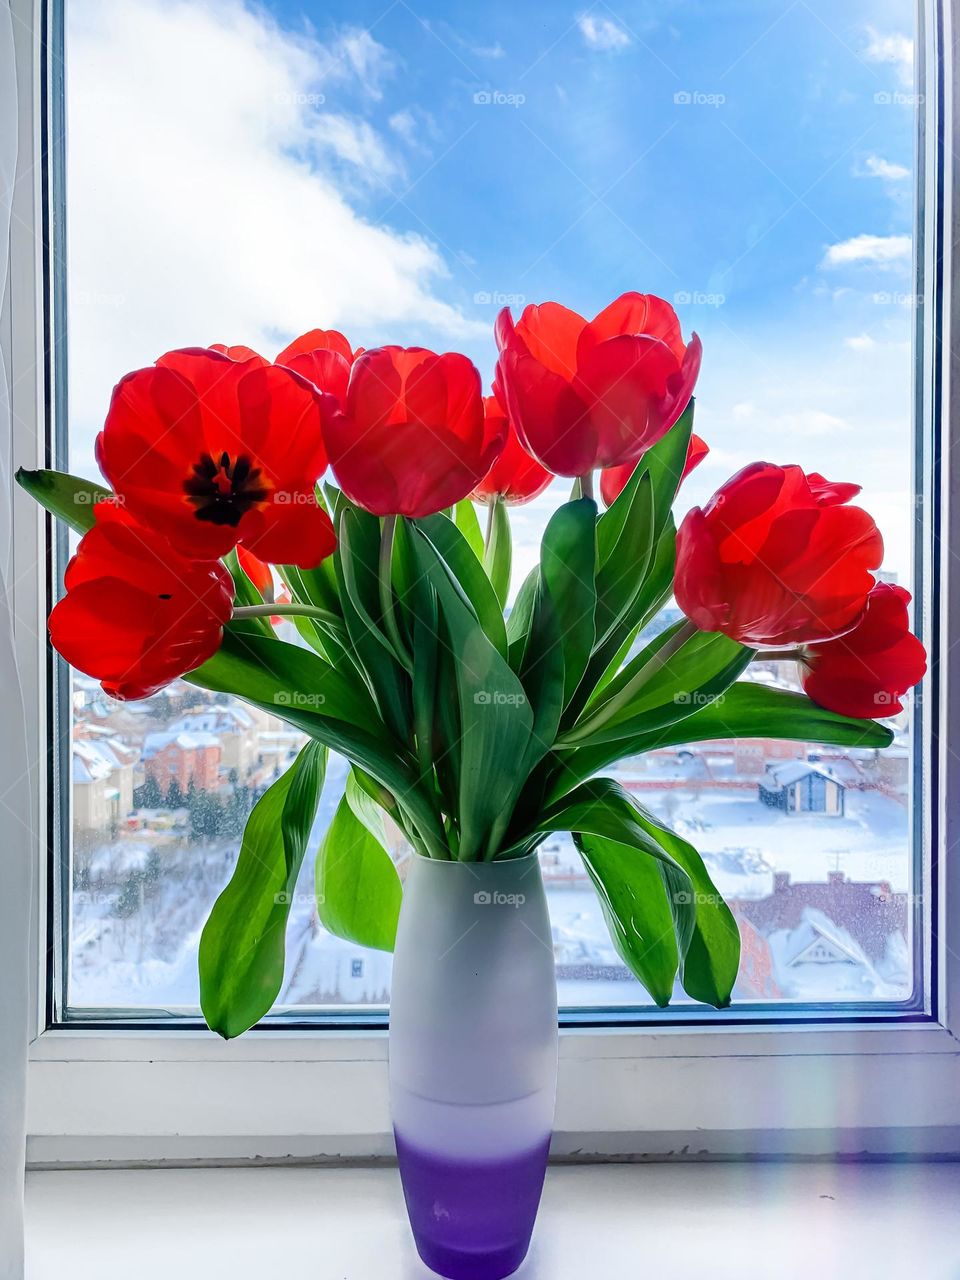 mobile photo of plants, tulips in a vase on the window